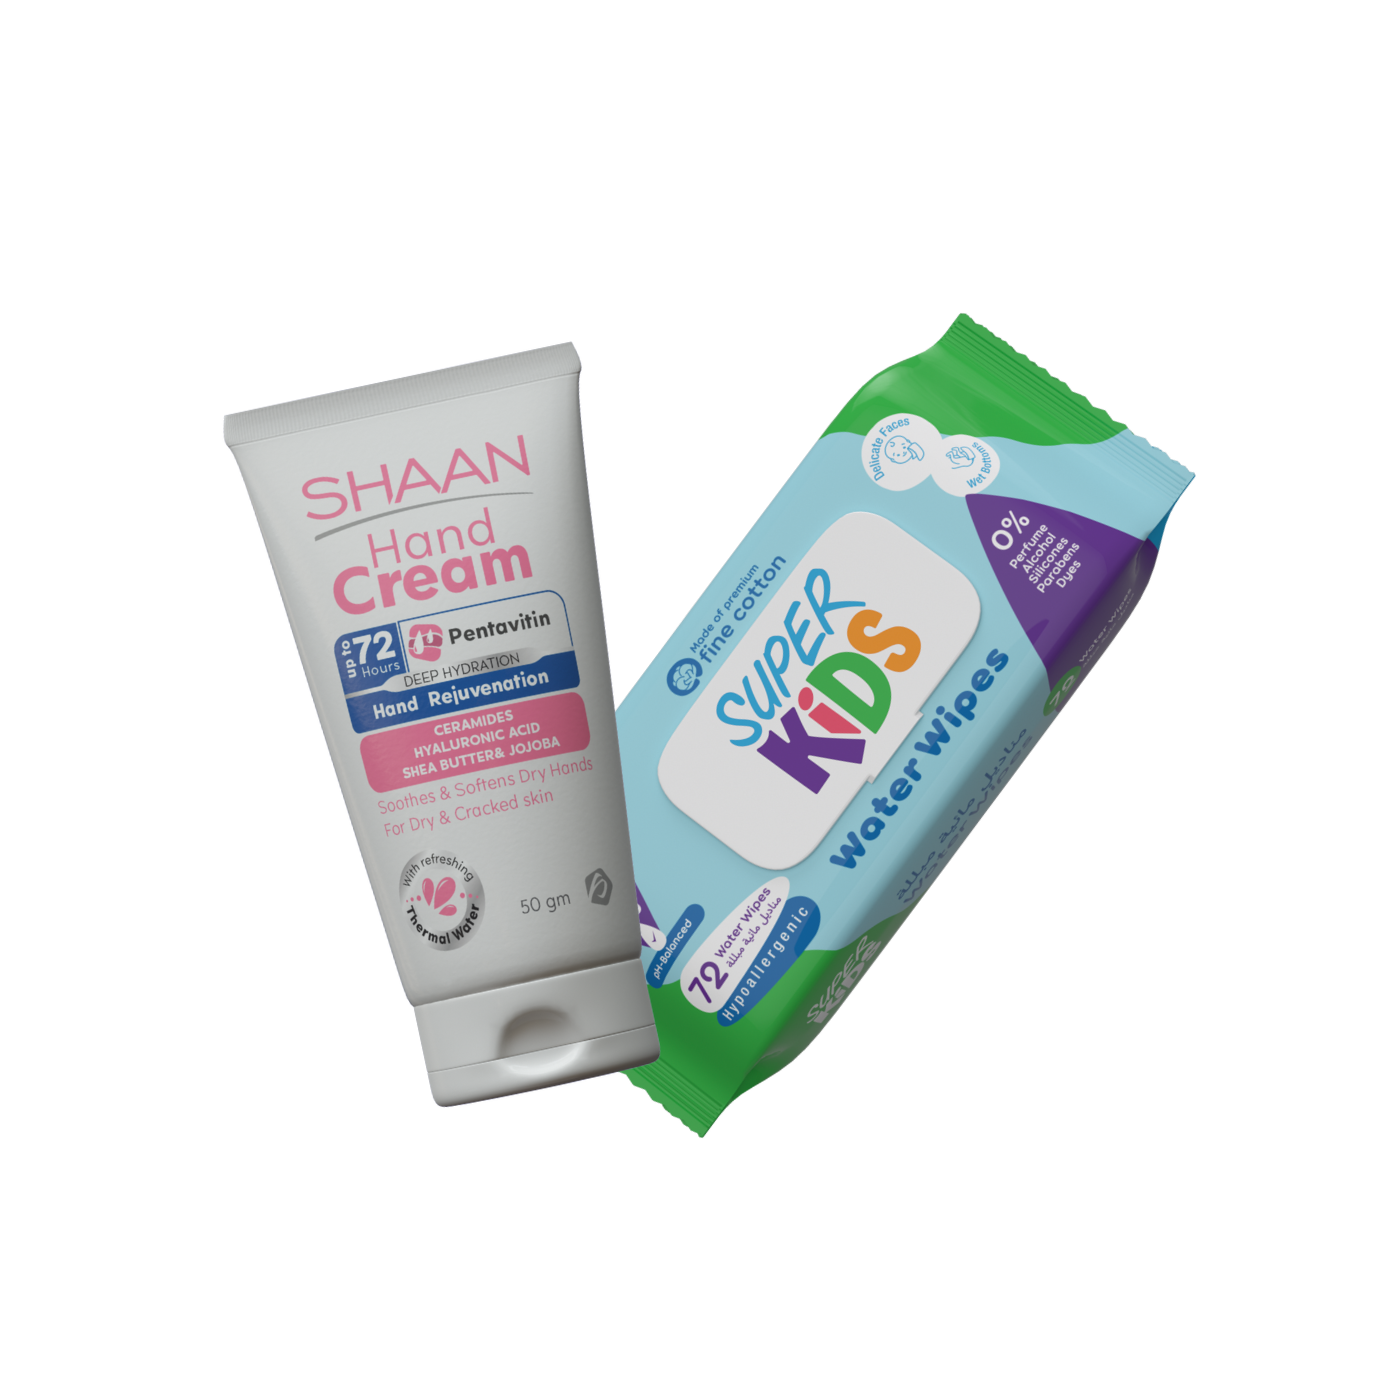 Mom & Baby Hand Cream & Water Wipes Offer